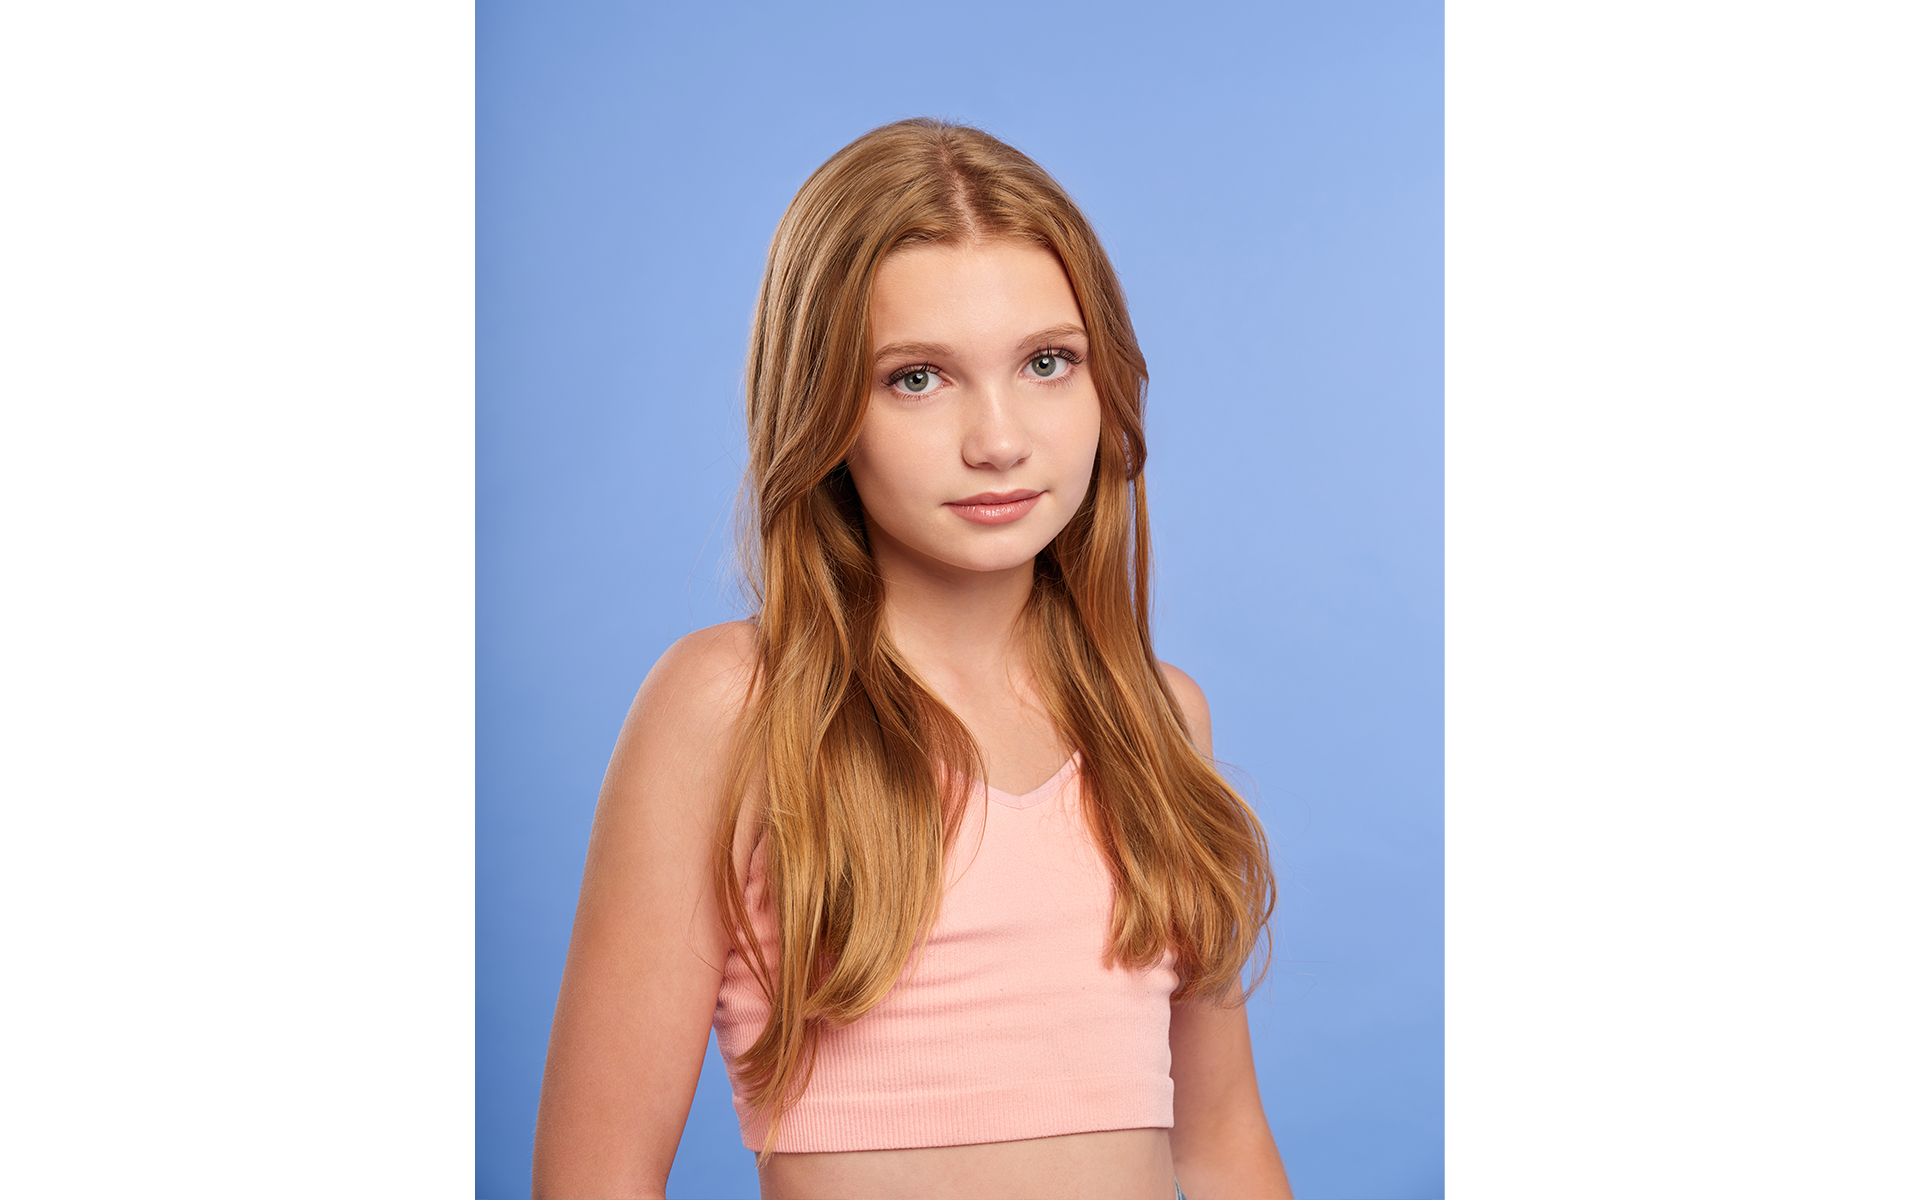 Blonde teenage model wearing pink top in front of blue back drop on a brand fashion photo shoot